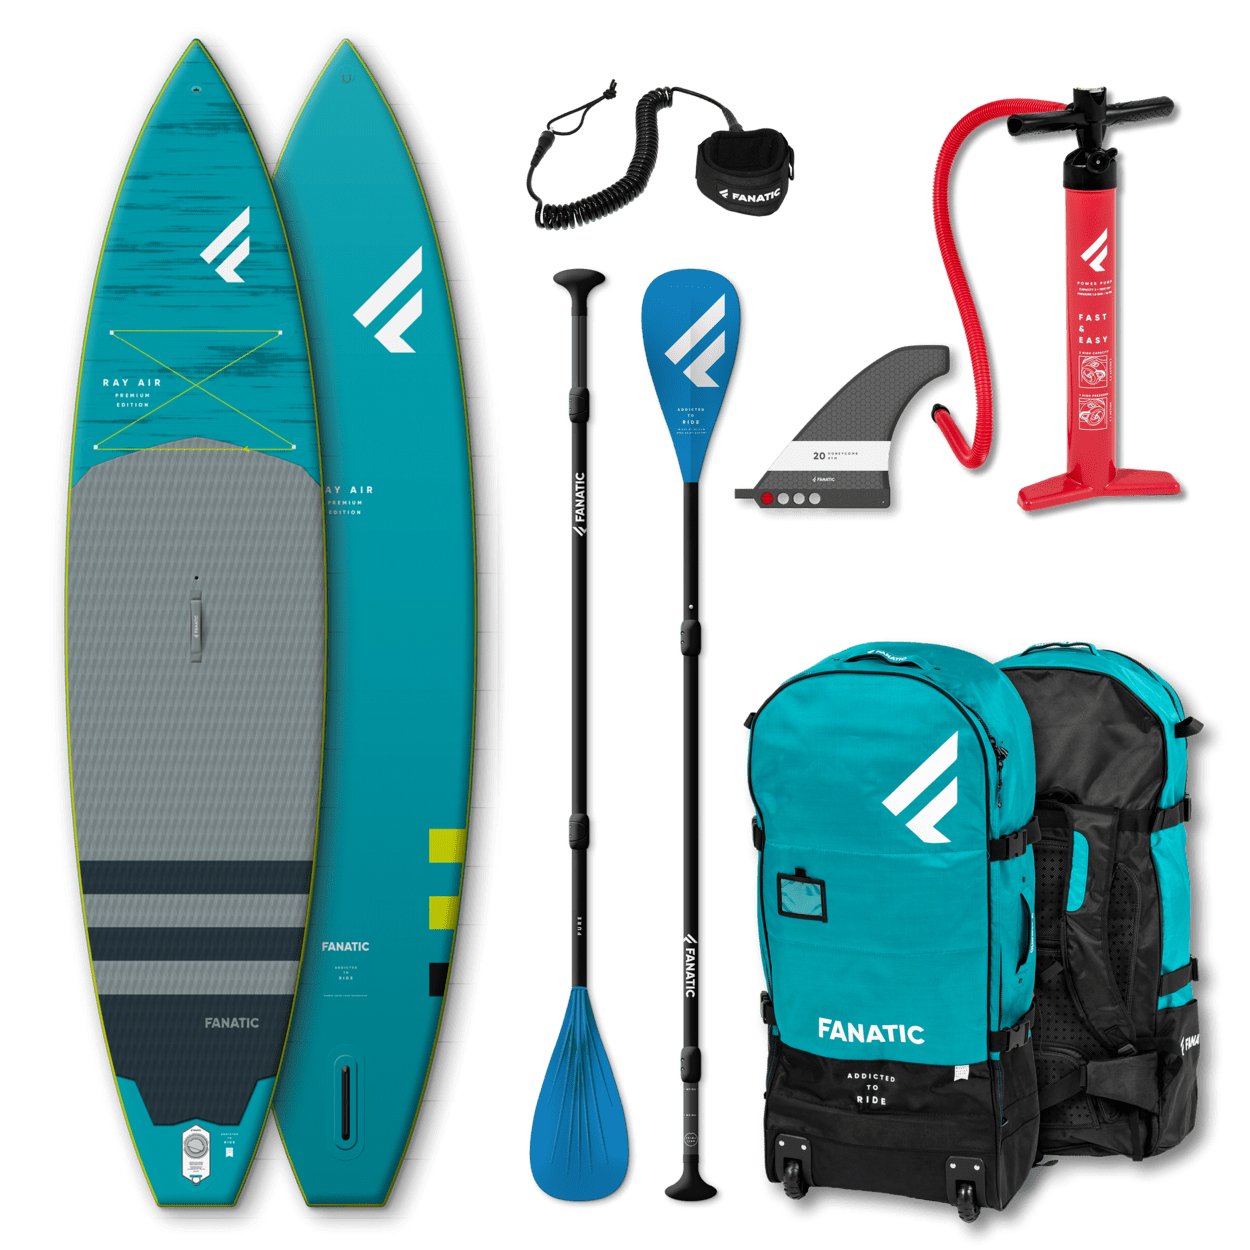 Fanatic Package Ray Air Premium/Pure 2022 iSUP Paddleboard - Worthing Watersports - 9008415938513 - iSUP Packages - Fanatic SUP